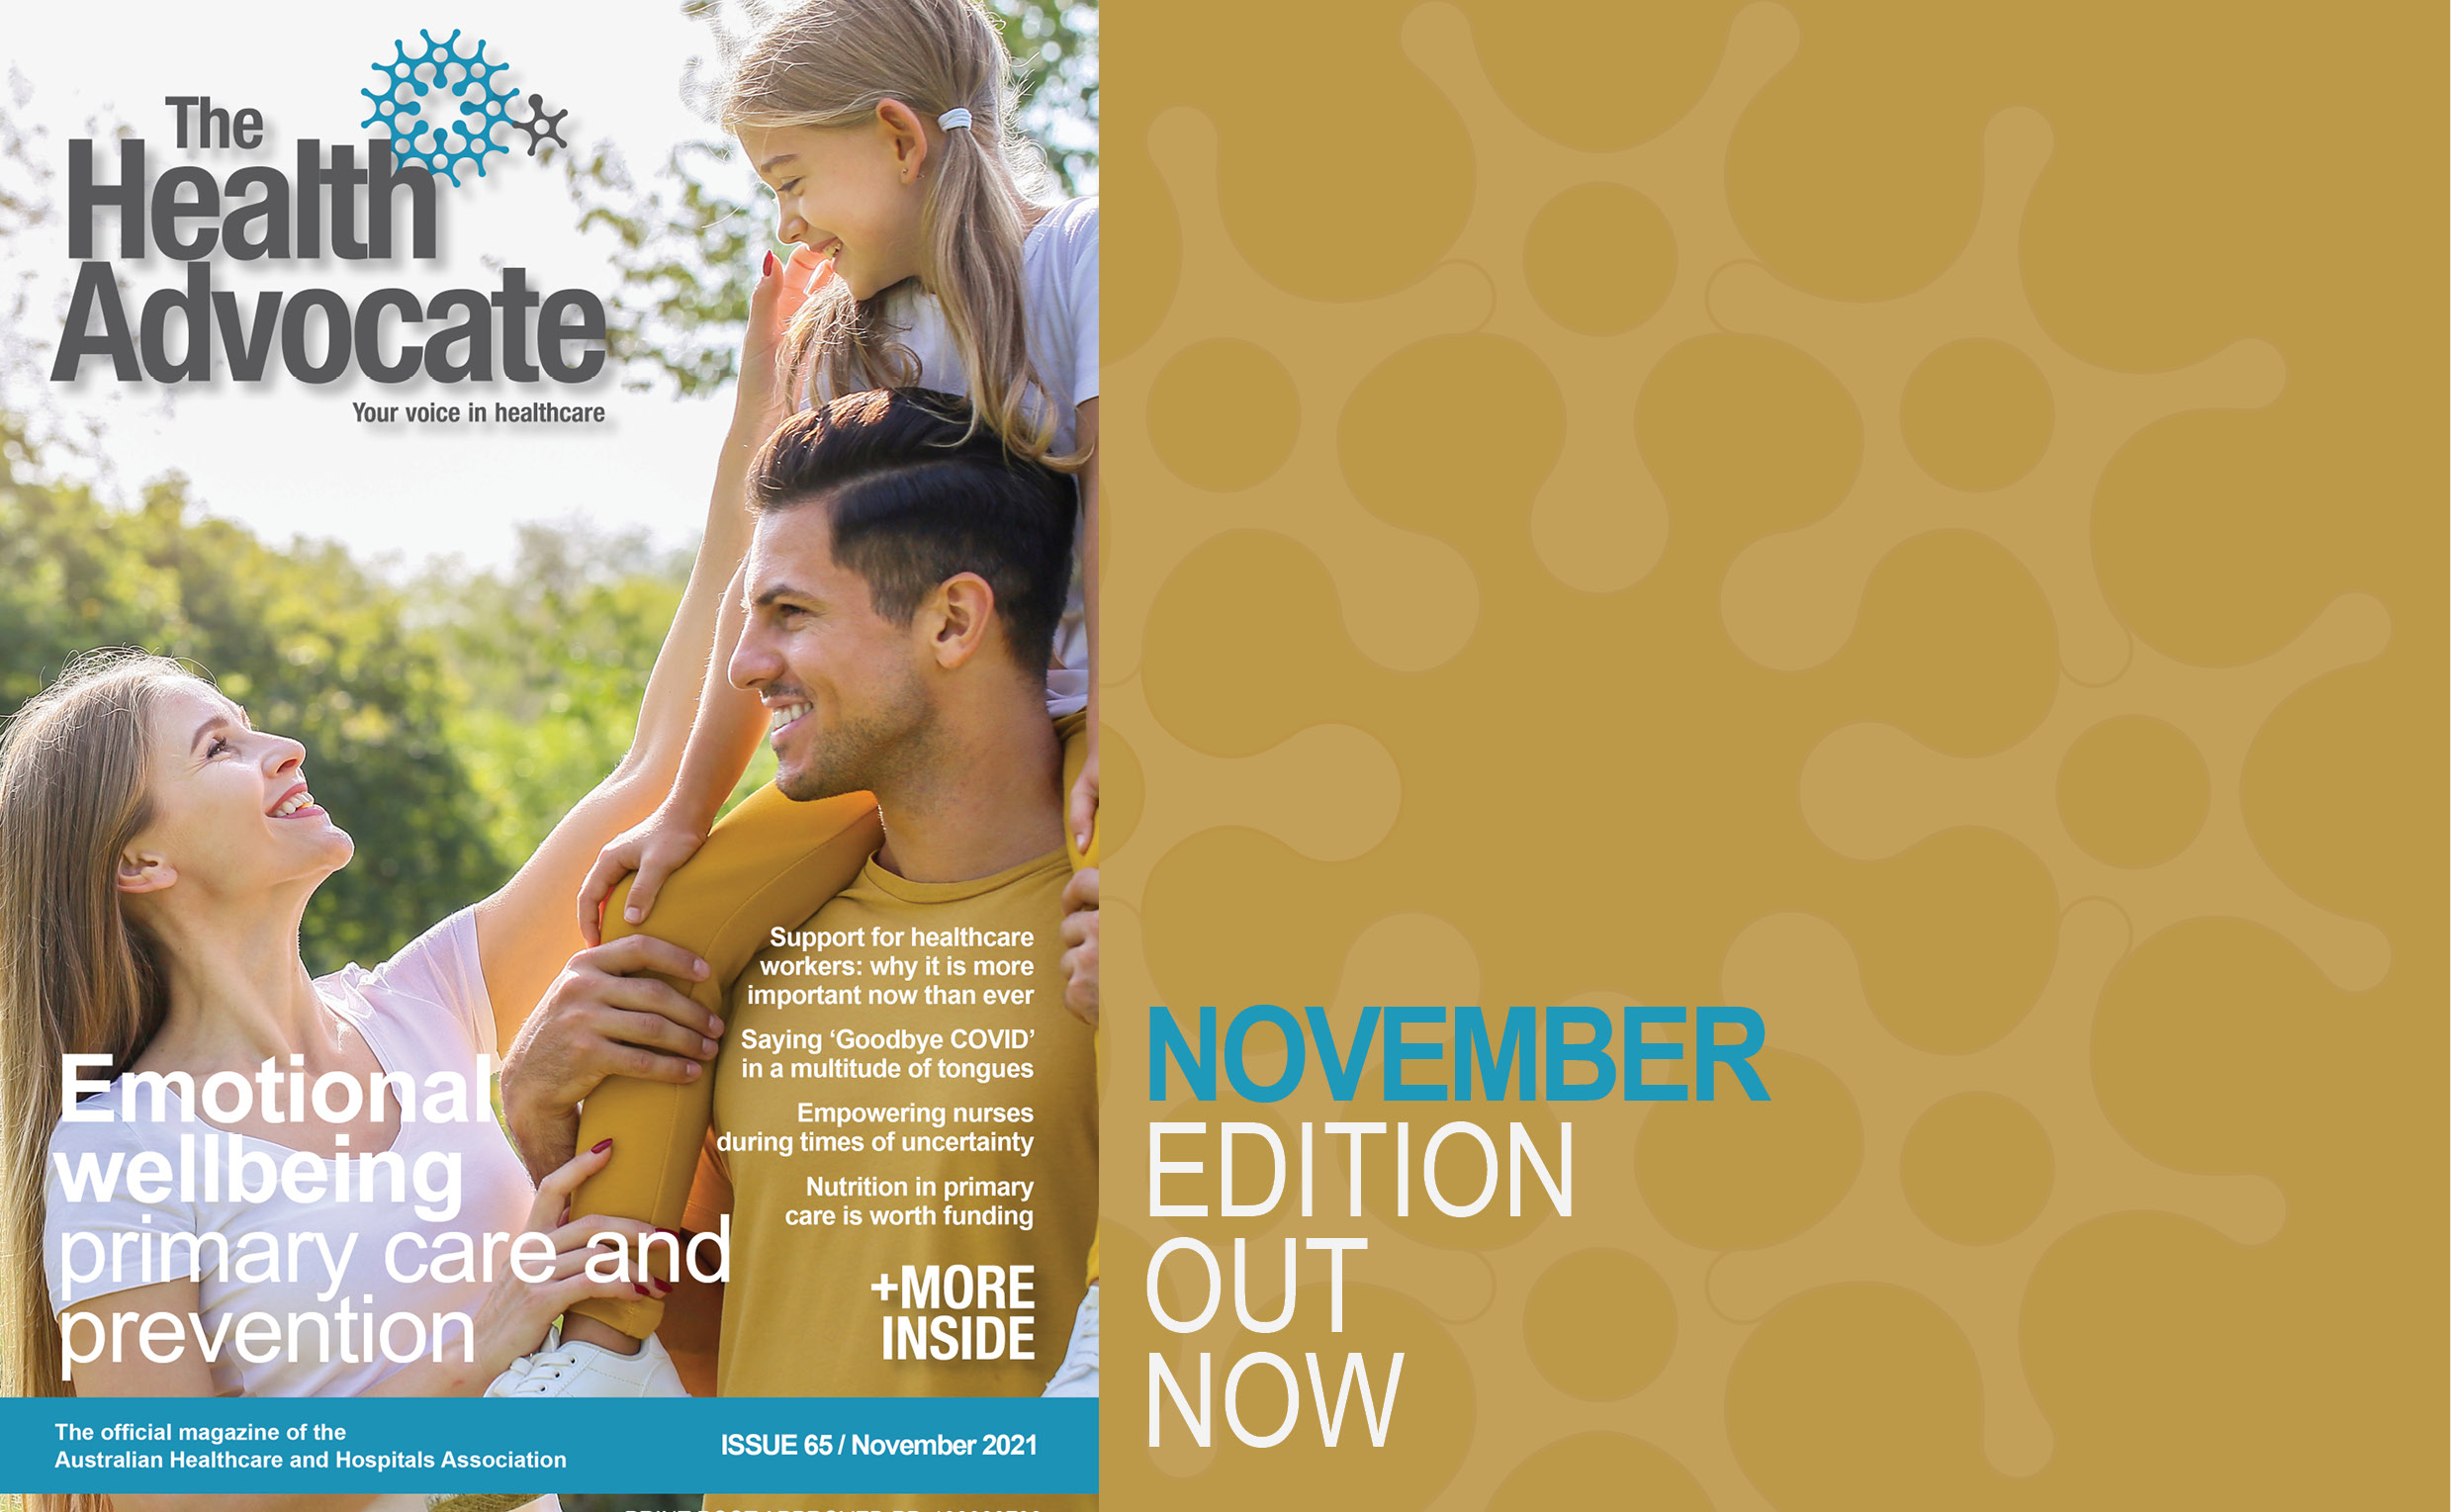 November edition out now